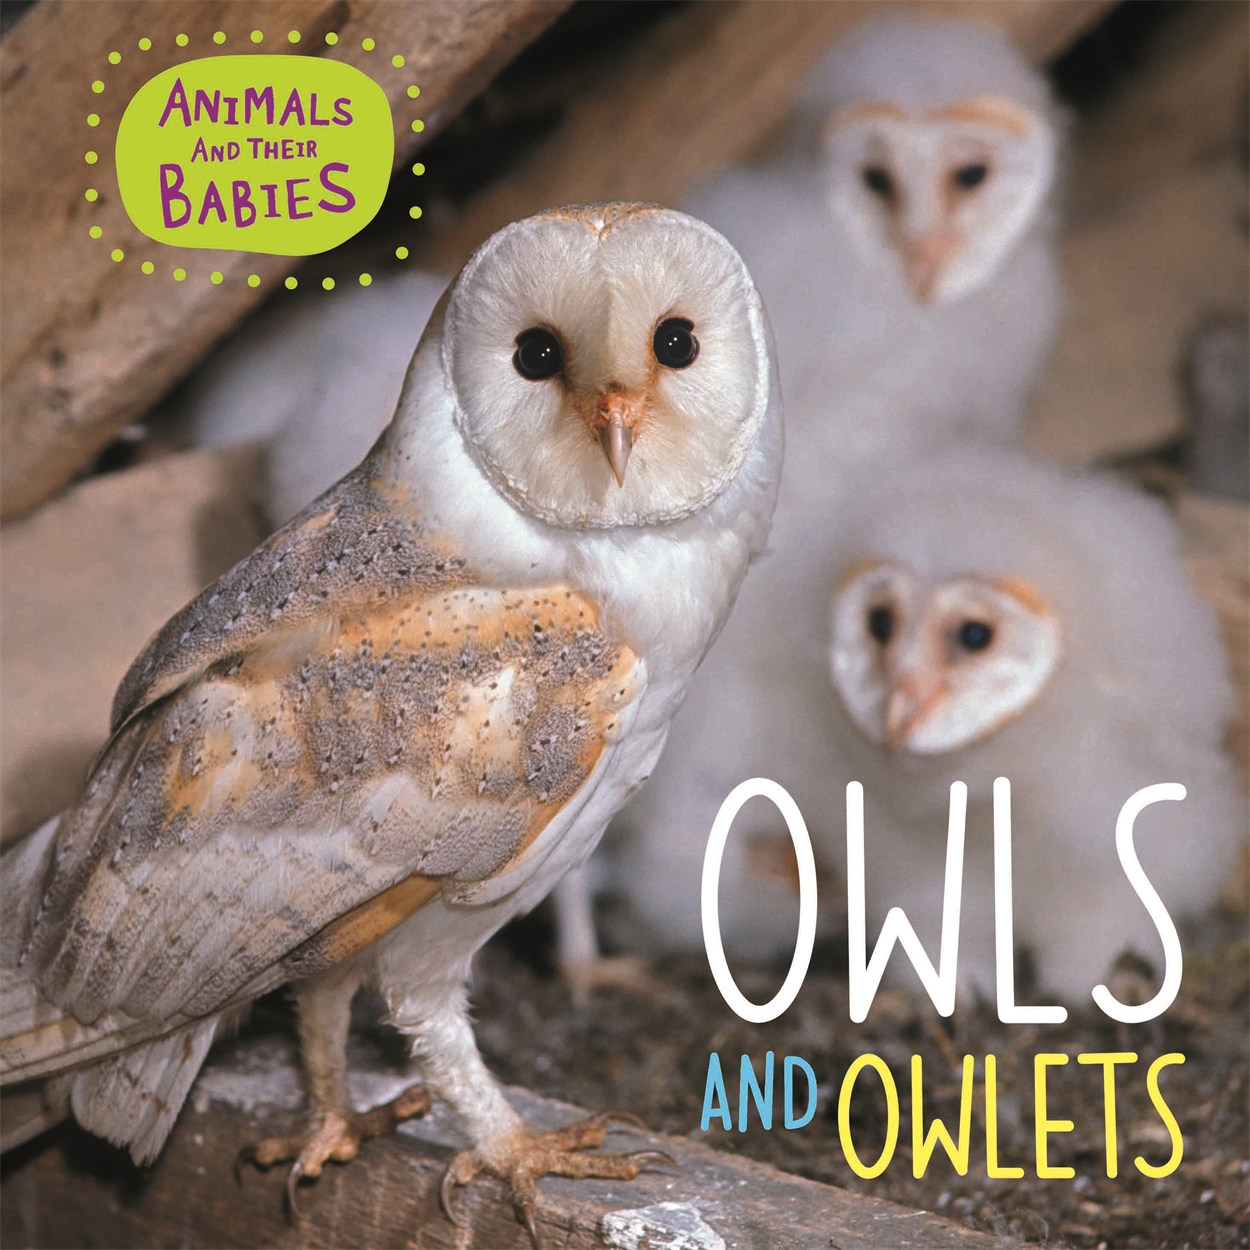 Animals and their Babies: Owls & Owlets by Annabelle Lynch | Hachette UK